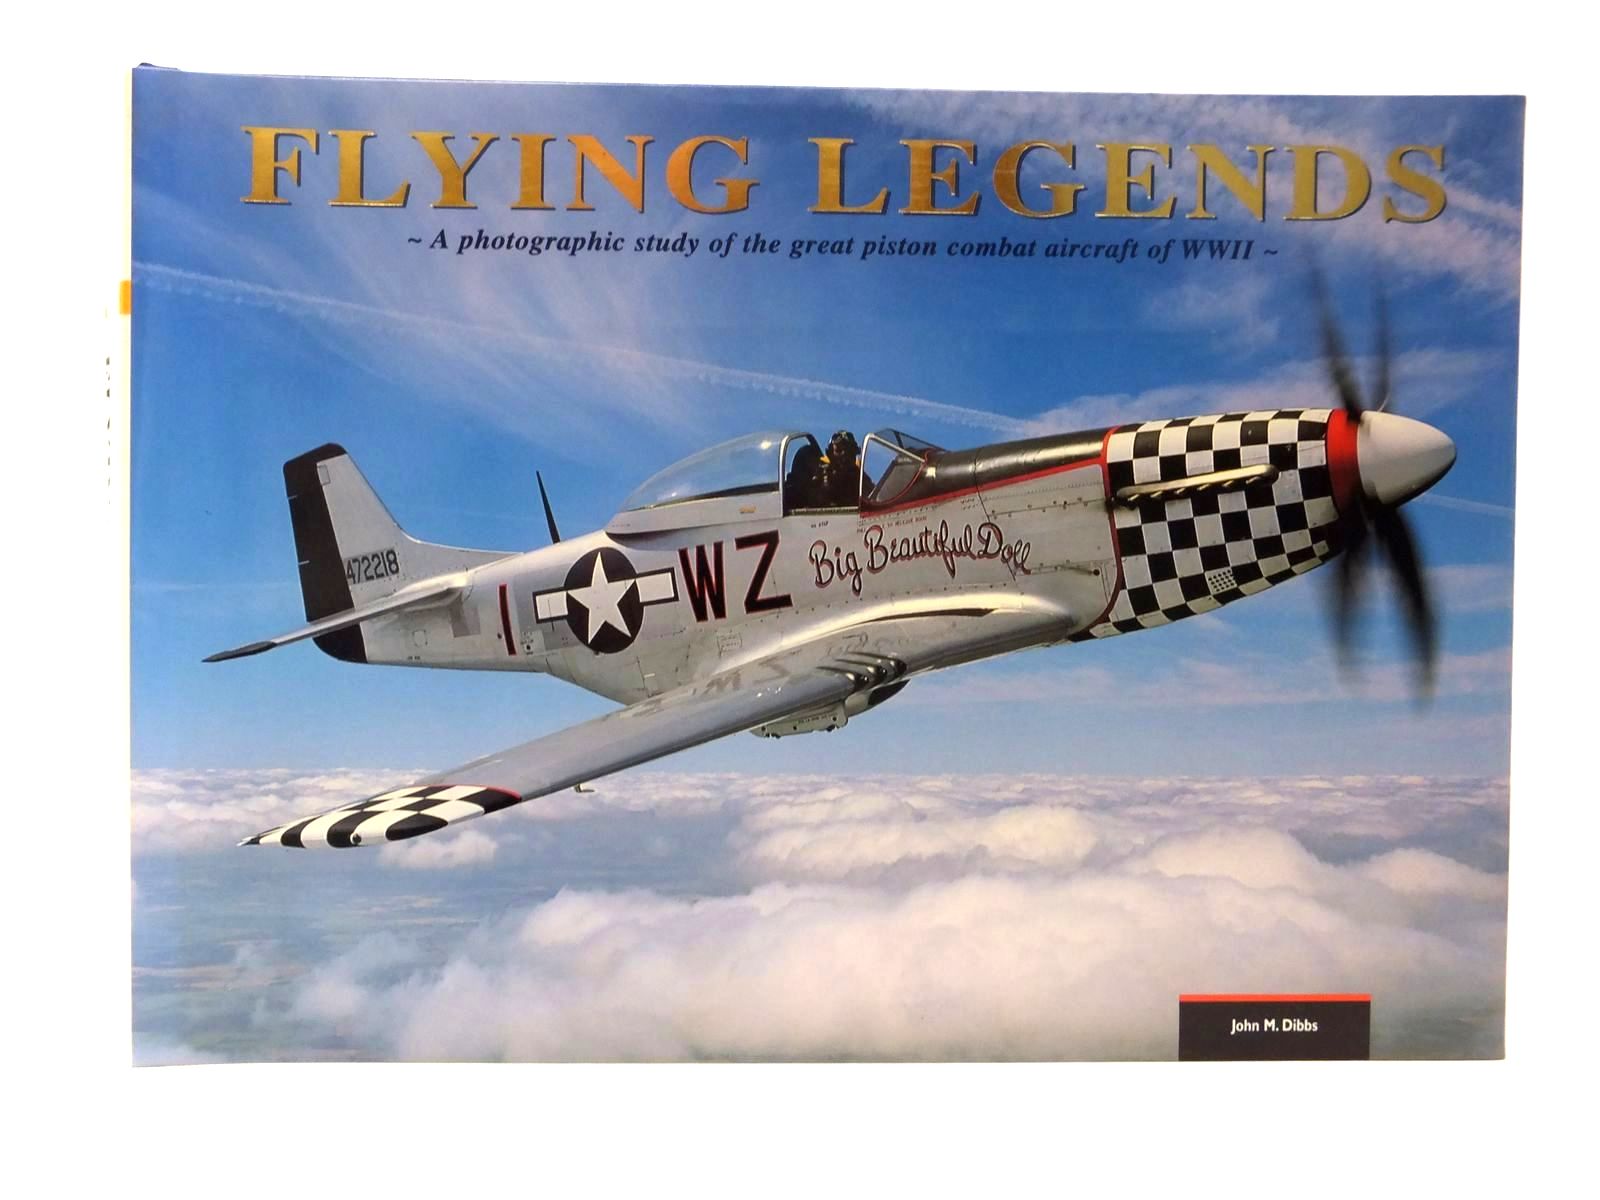 Photo of FLYING LEGENDS - A PHOTOGRAPHIC STUDY OF THE GREAT PISTON COMBAT AIRCRAFT OF WWII written by Holmes, Tony illustrated by Dibbs, John M. published by The Plane Picture Co. Publishing (STOCK CODE: 1609518)  for sale by Stella & Rose's Books